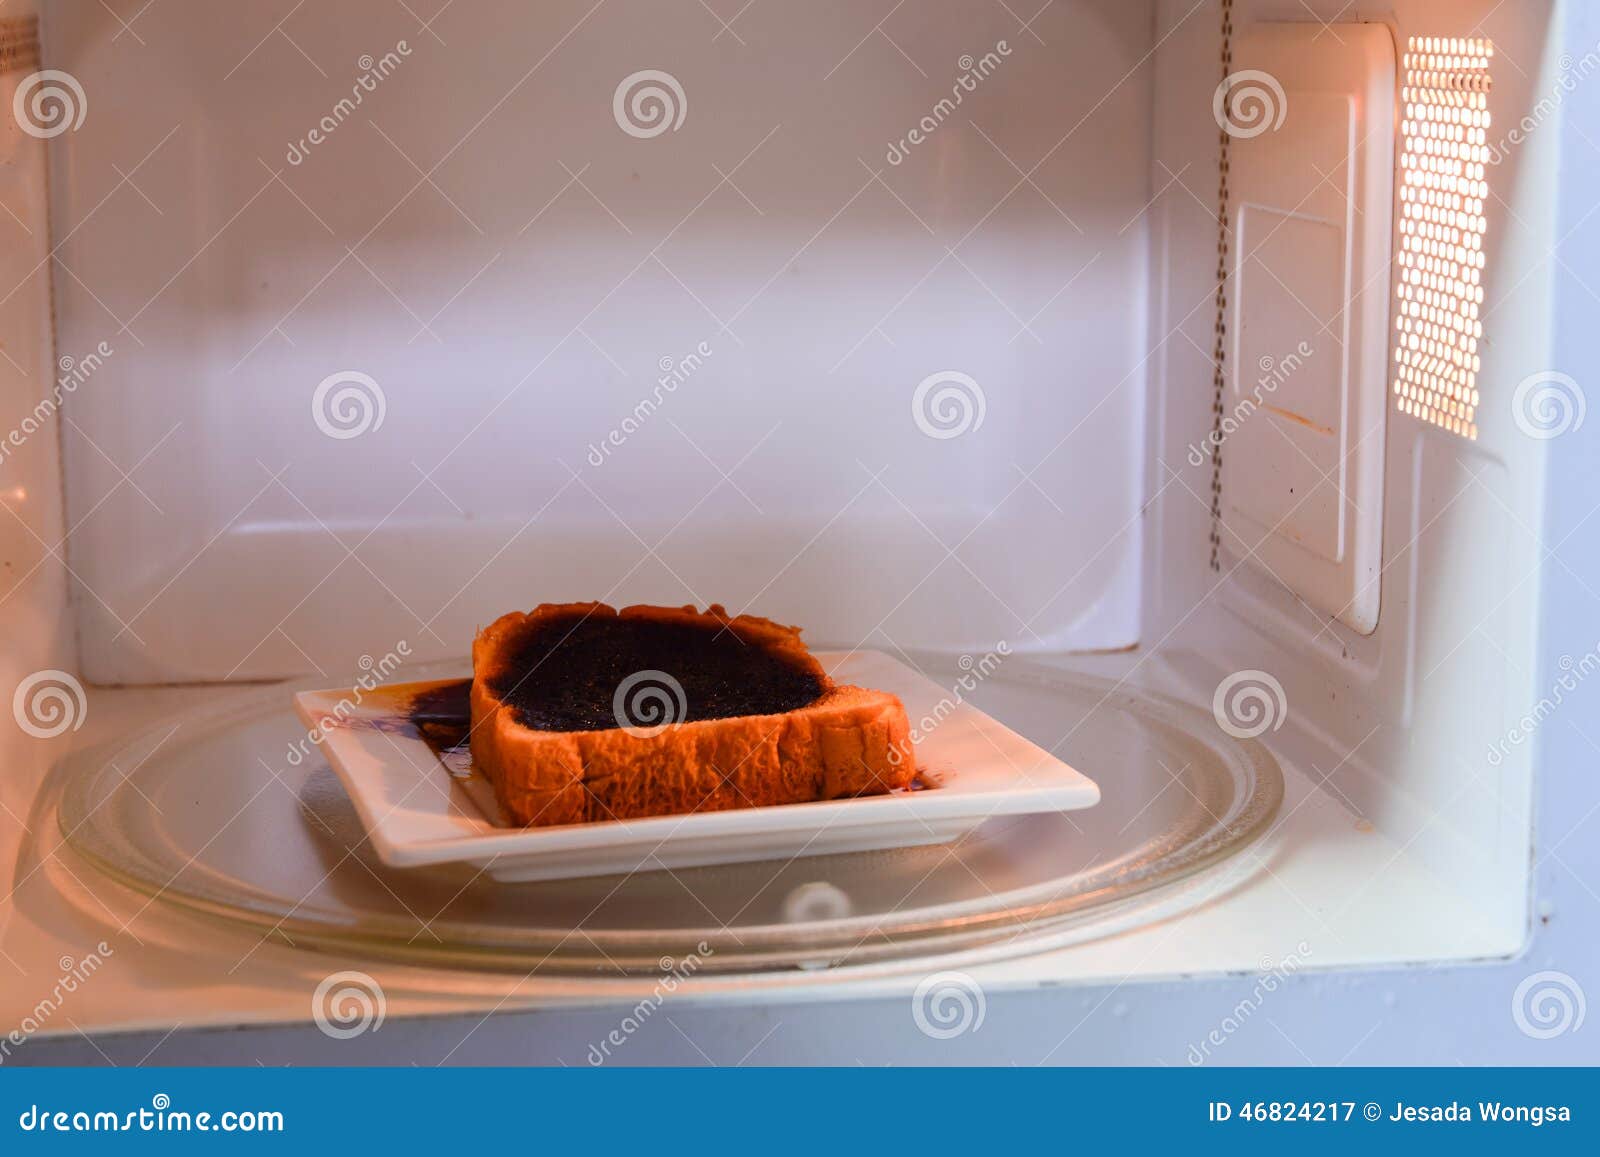 Burnt Toast Eggs In The Microwave Stock Image Image Of Plate Preparing 46824217